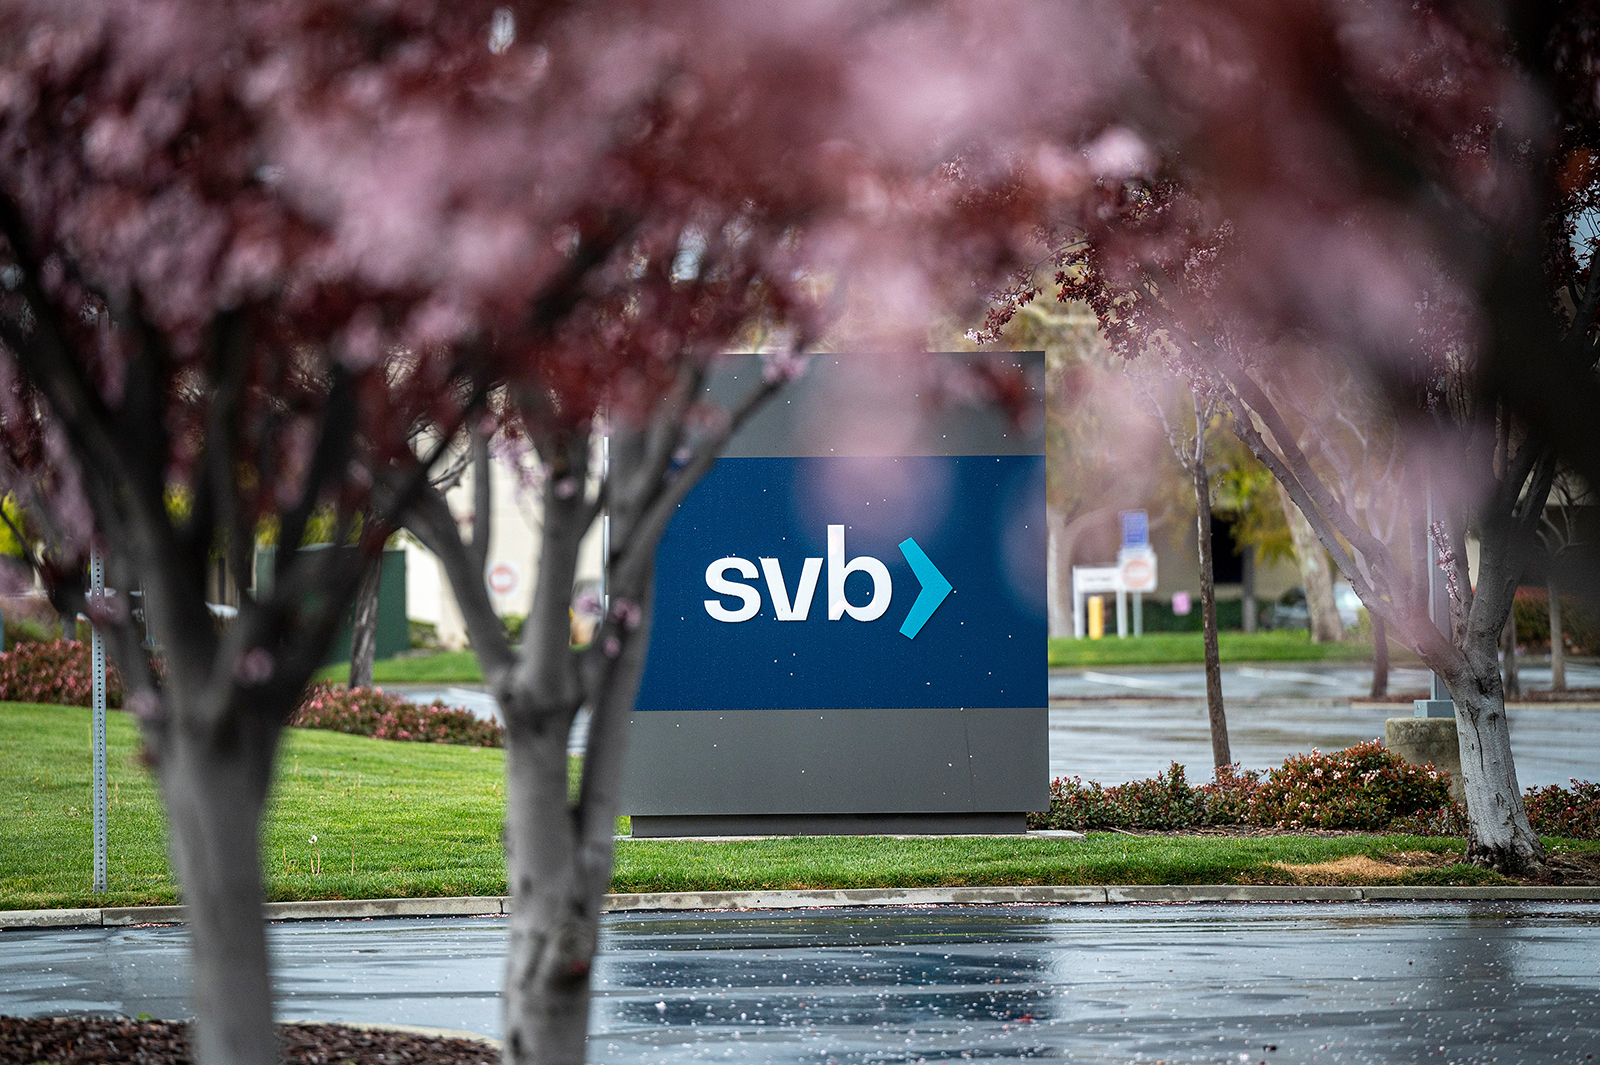 Silicon Valley Bank shut down by regulators, FDIC says